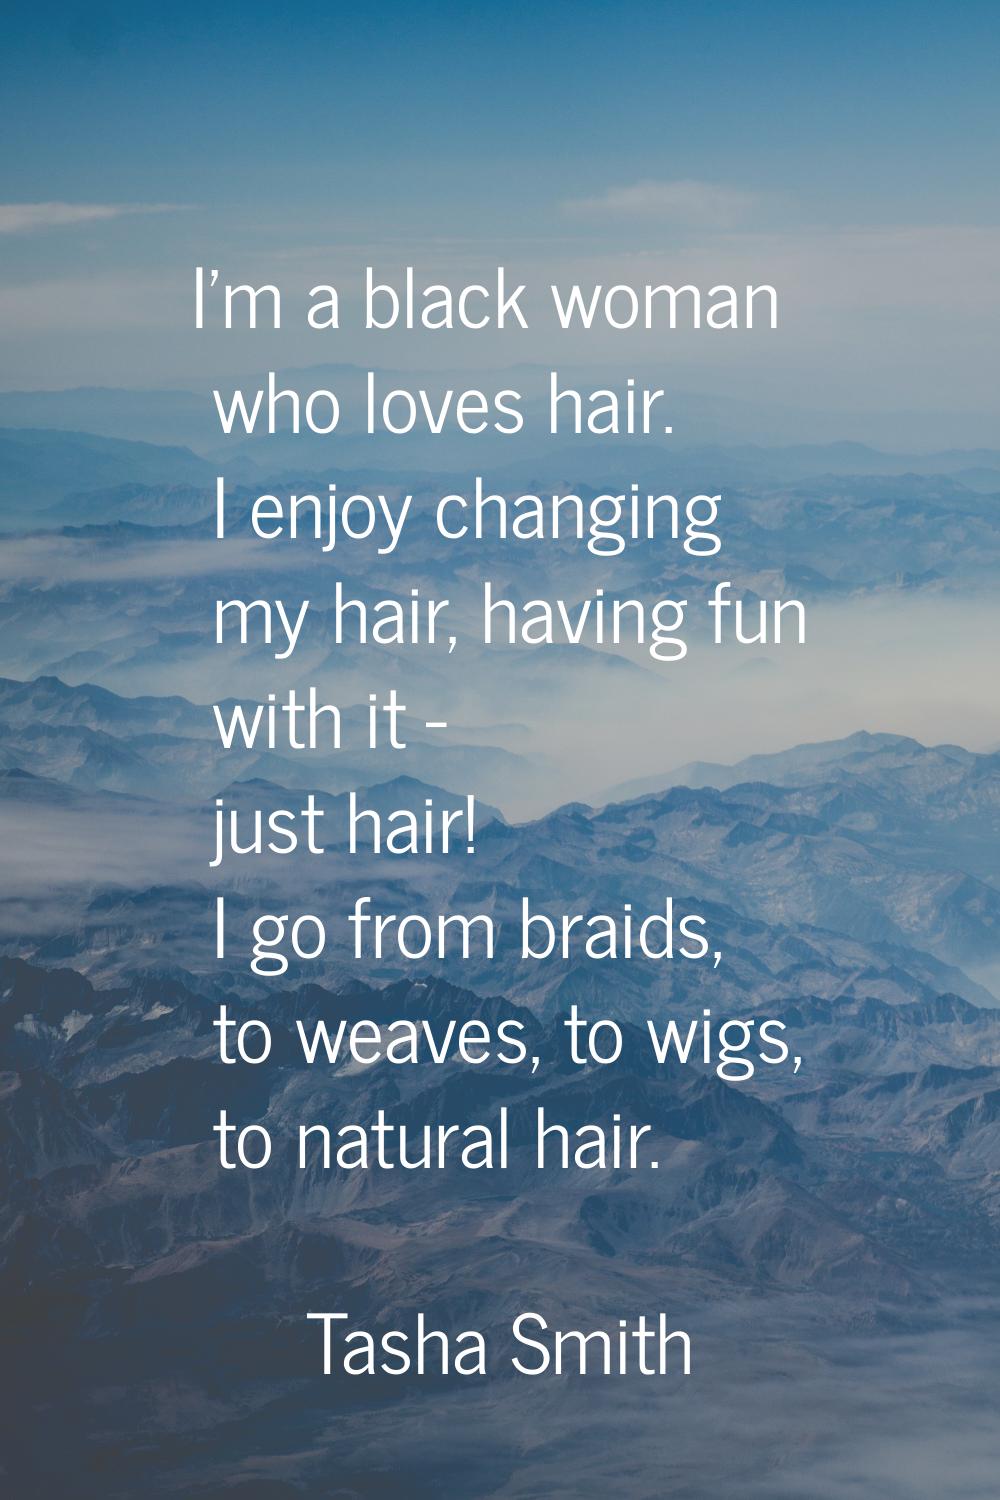 I'm a black woman who loves hair. I enjoy changing my hair, having fun with it - just hair! I go fr